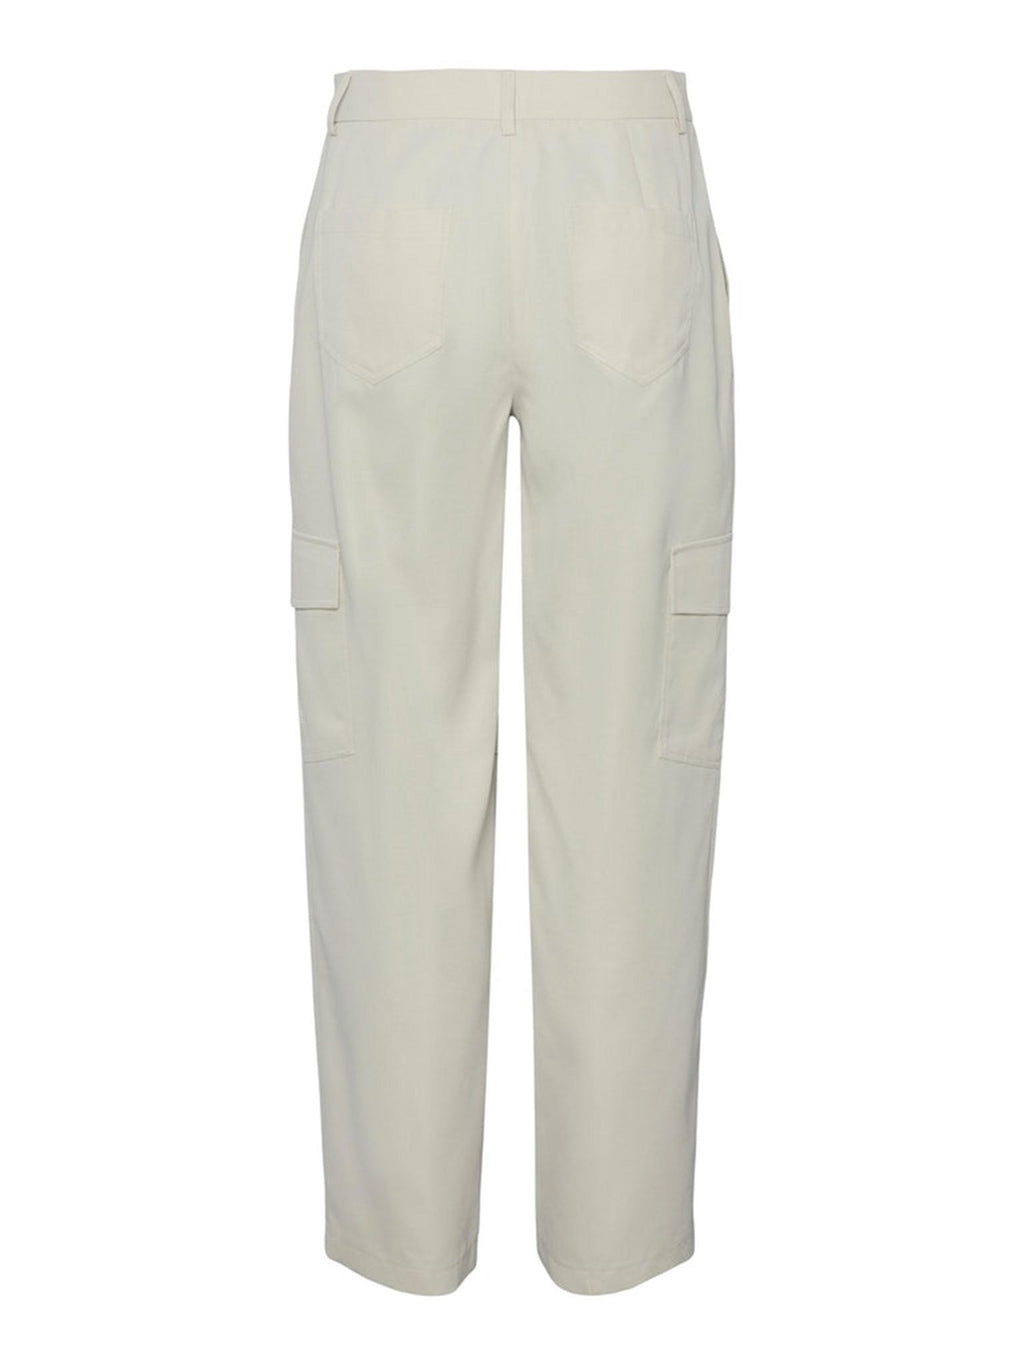 Sille -lading Pants - Witte peper